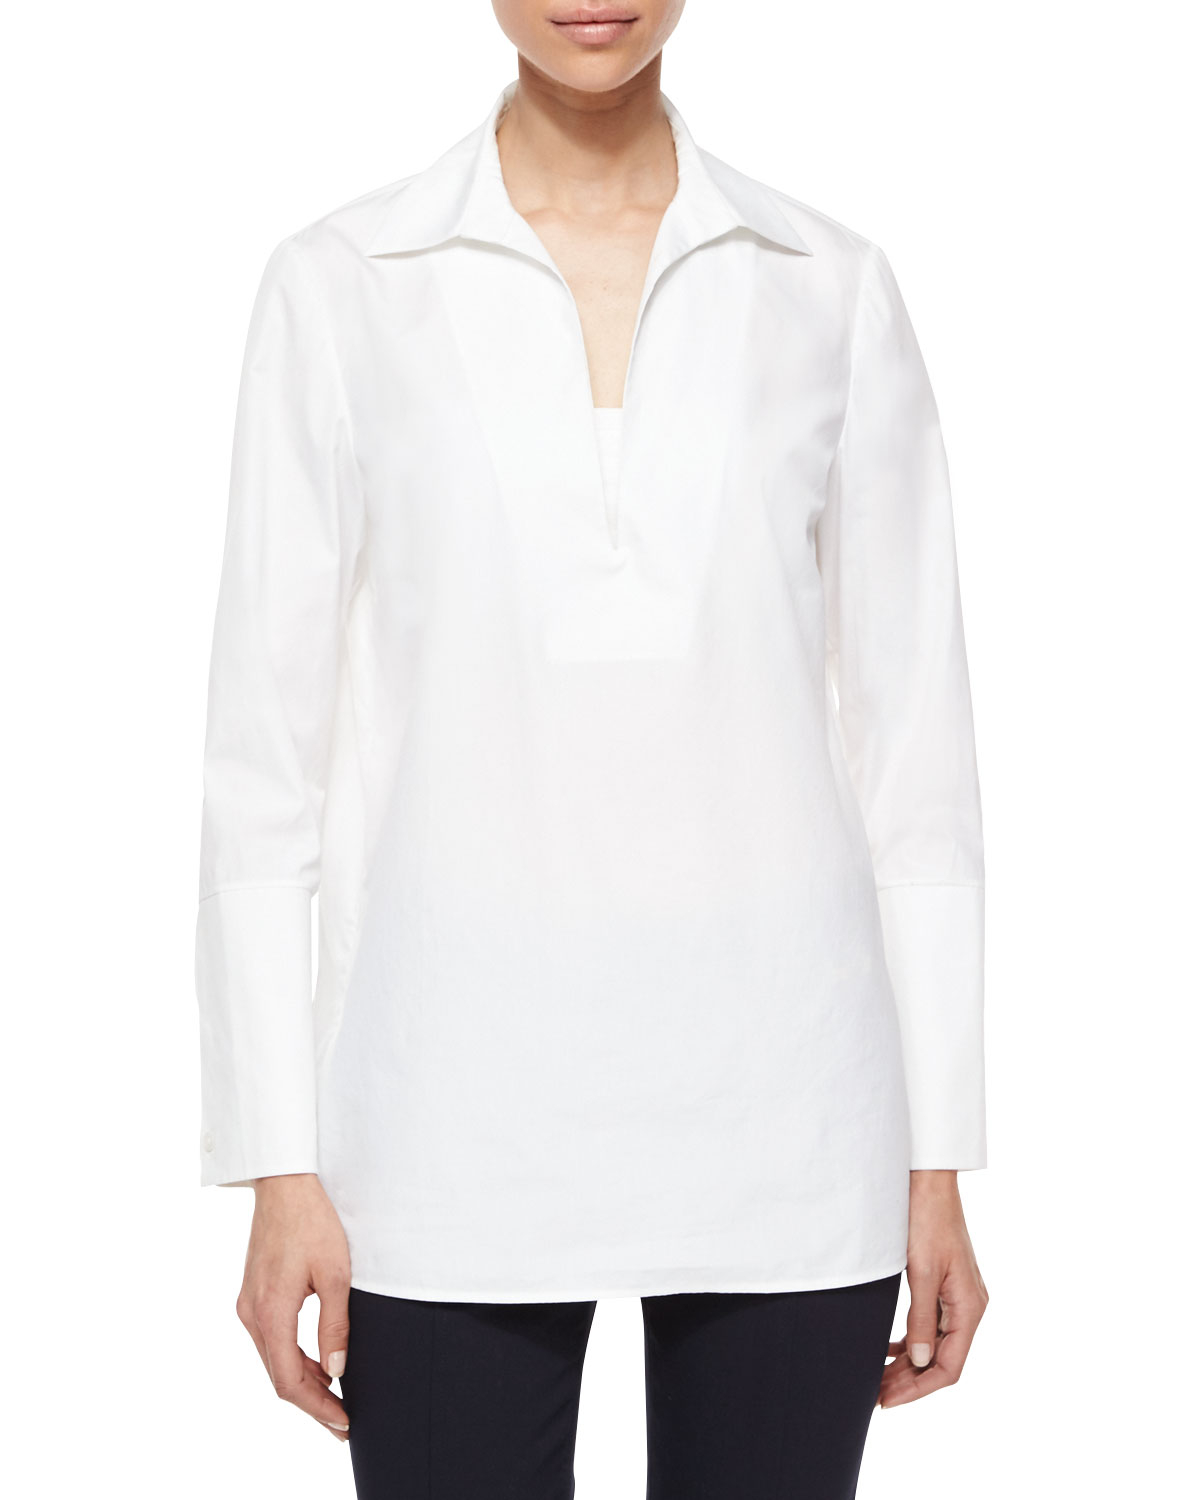 Lyst - Tory Burch Long-sleeve Cotton Tunic Blouse in White